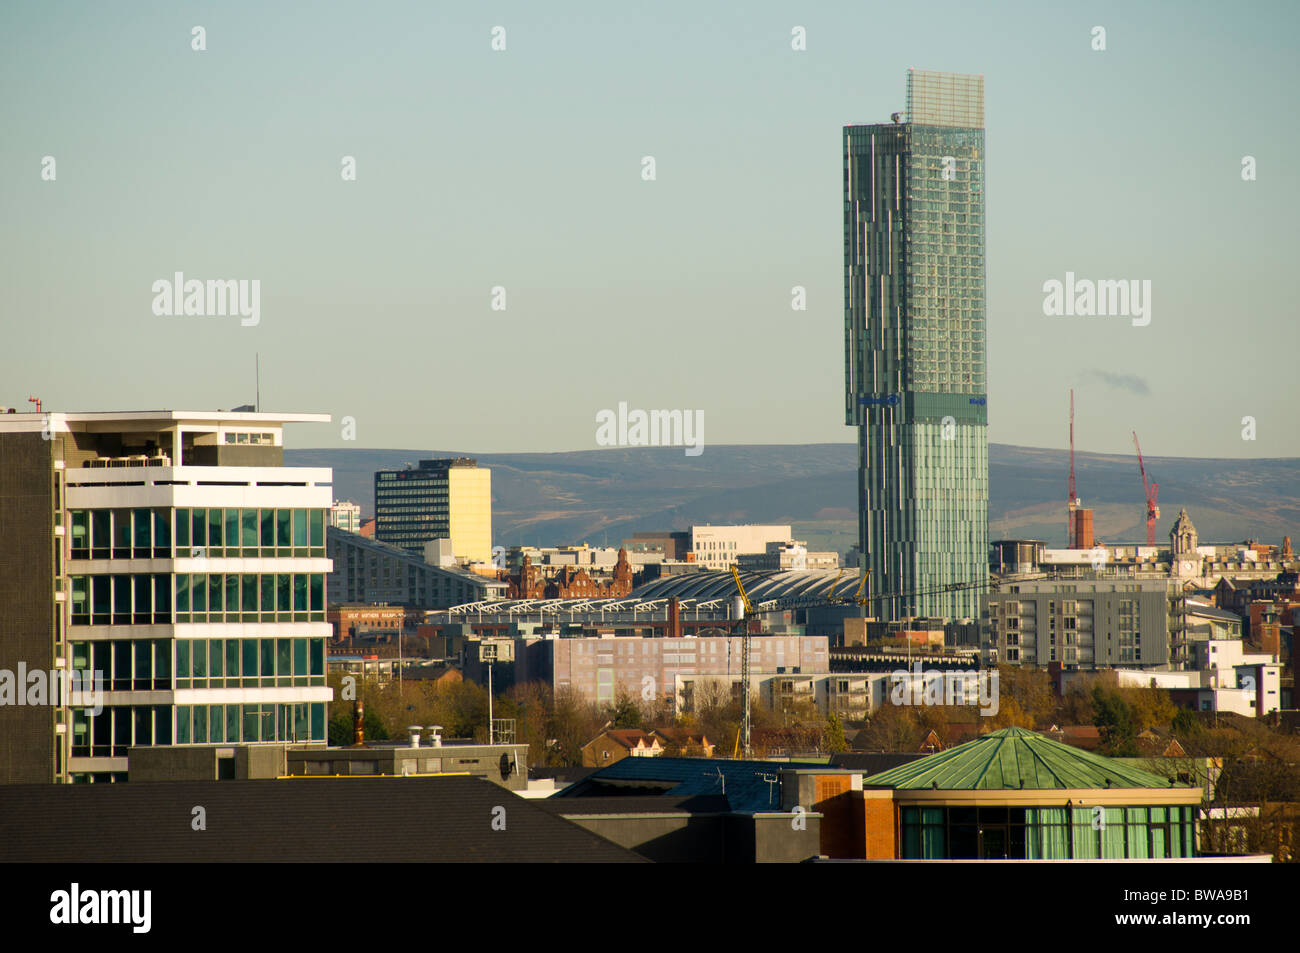 The Beetham Tower, also known as the Hilton Tower, tallest building in Manchester, England, UK. Pennine hills behind. Stock Photo